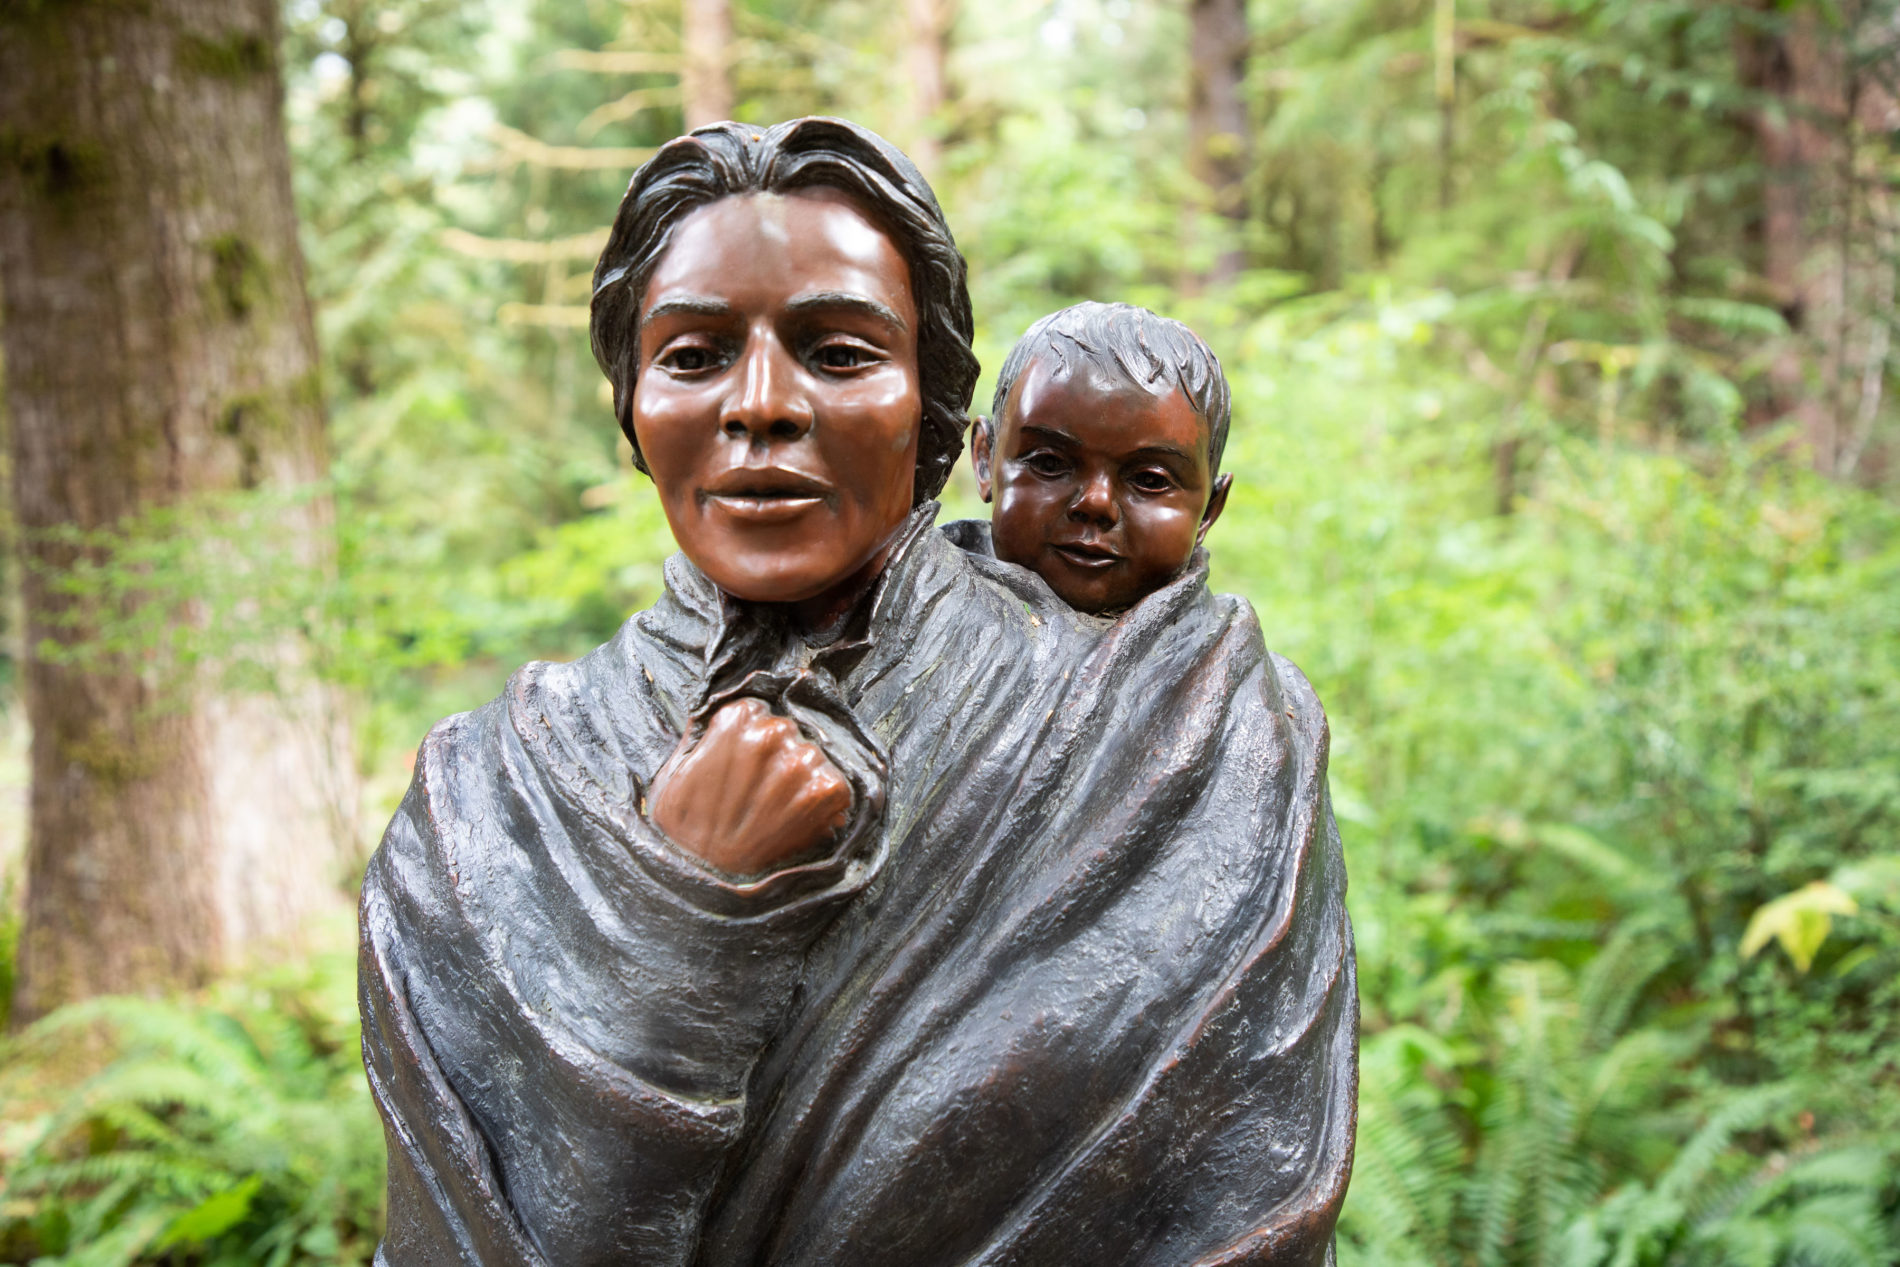 The Sacajawea and Pompey statue located in the Lewis and Clark National Historical Park in Oregon, about an hour's drive from I-5.